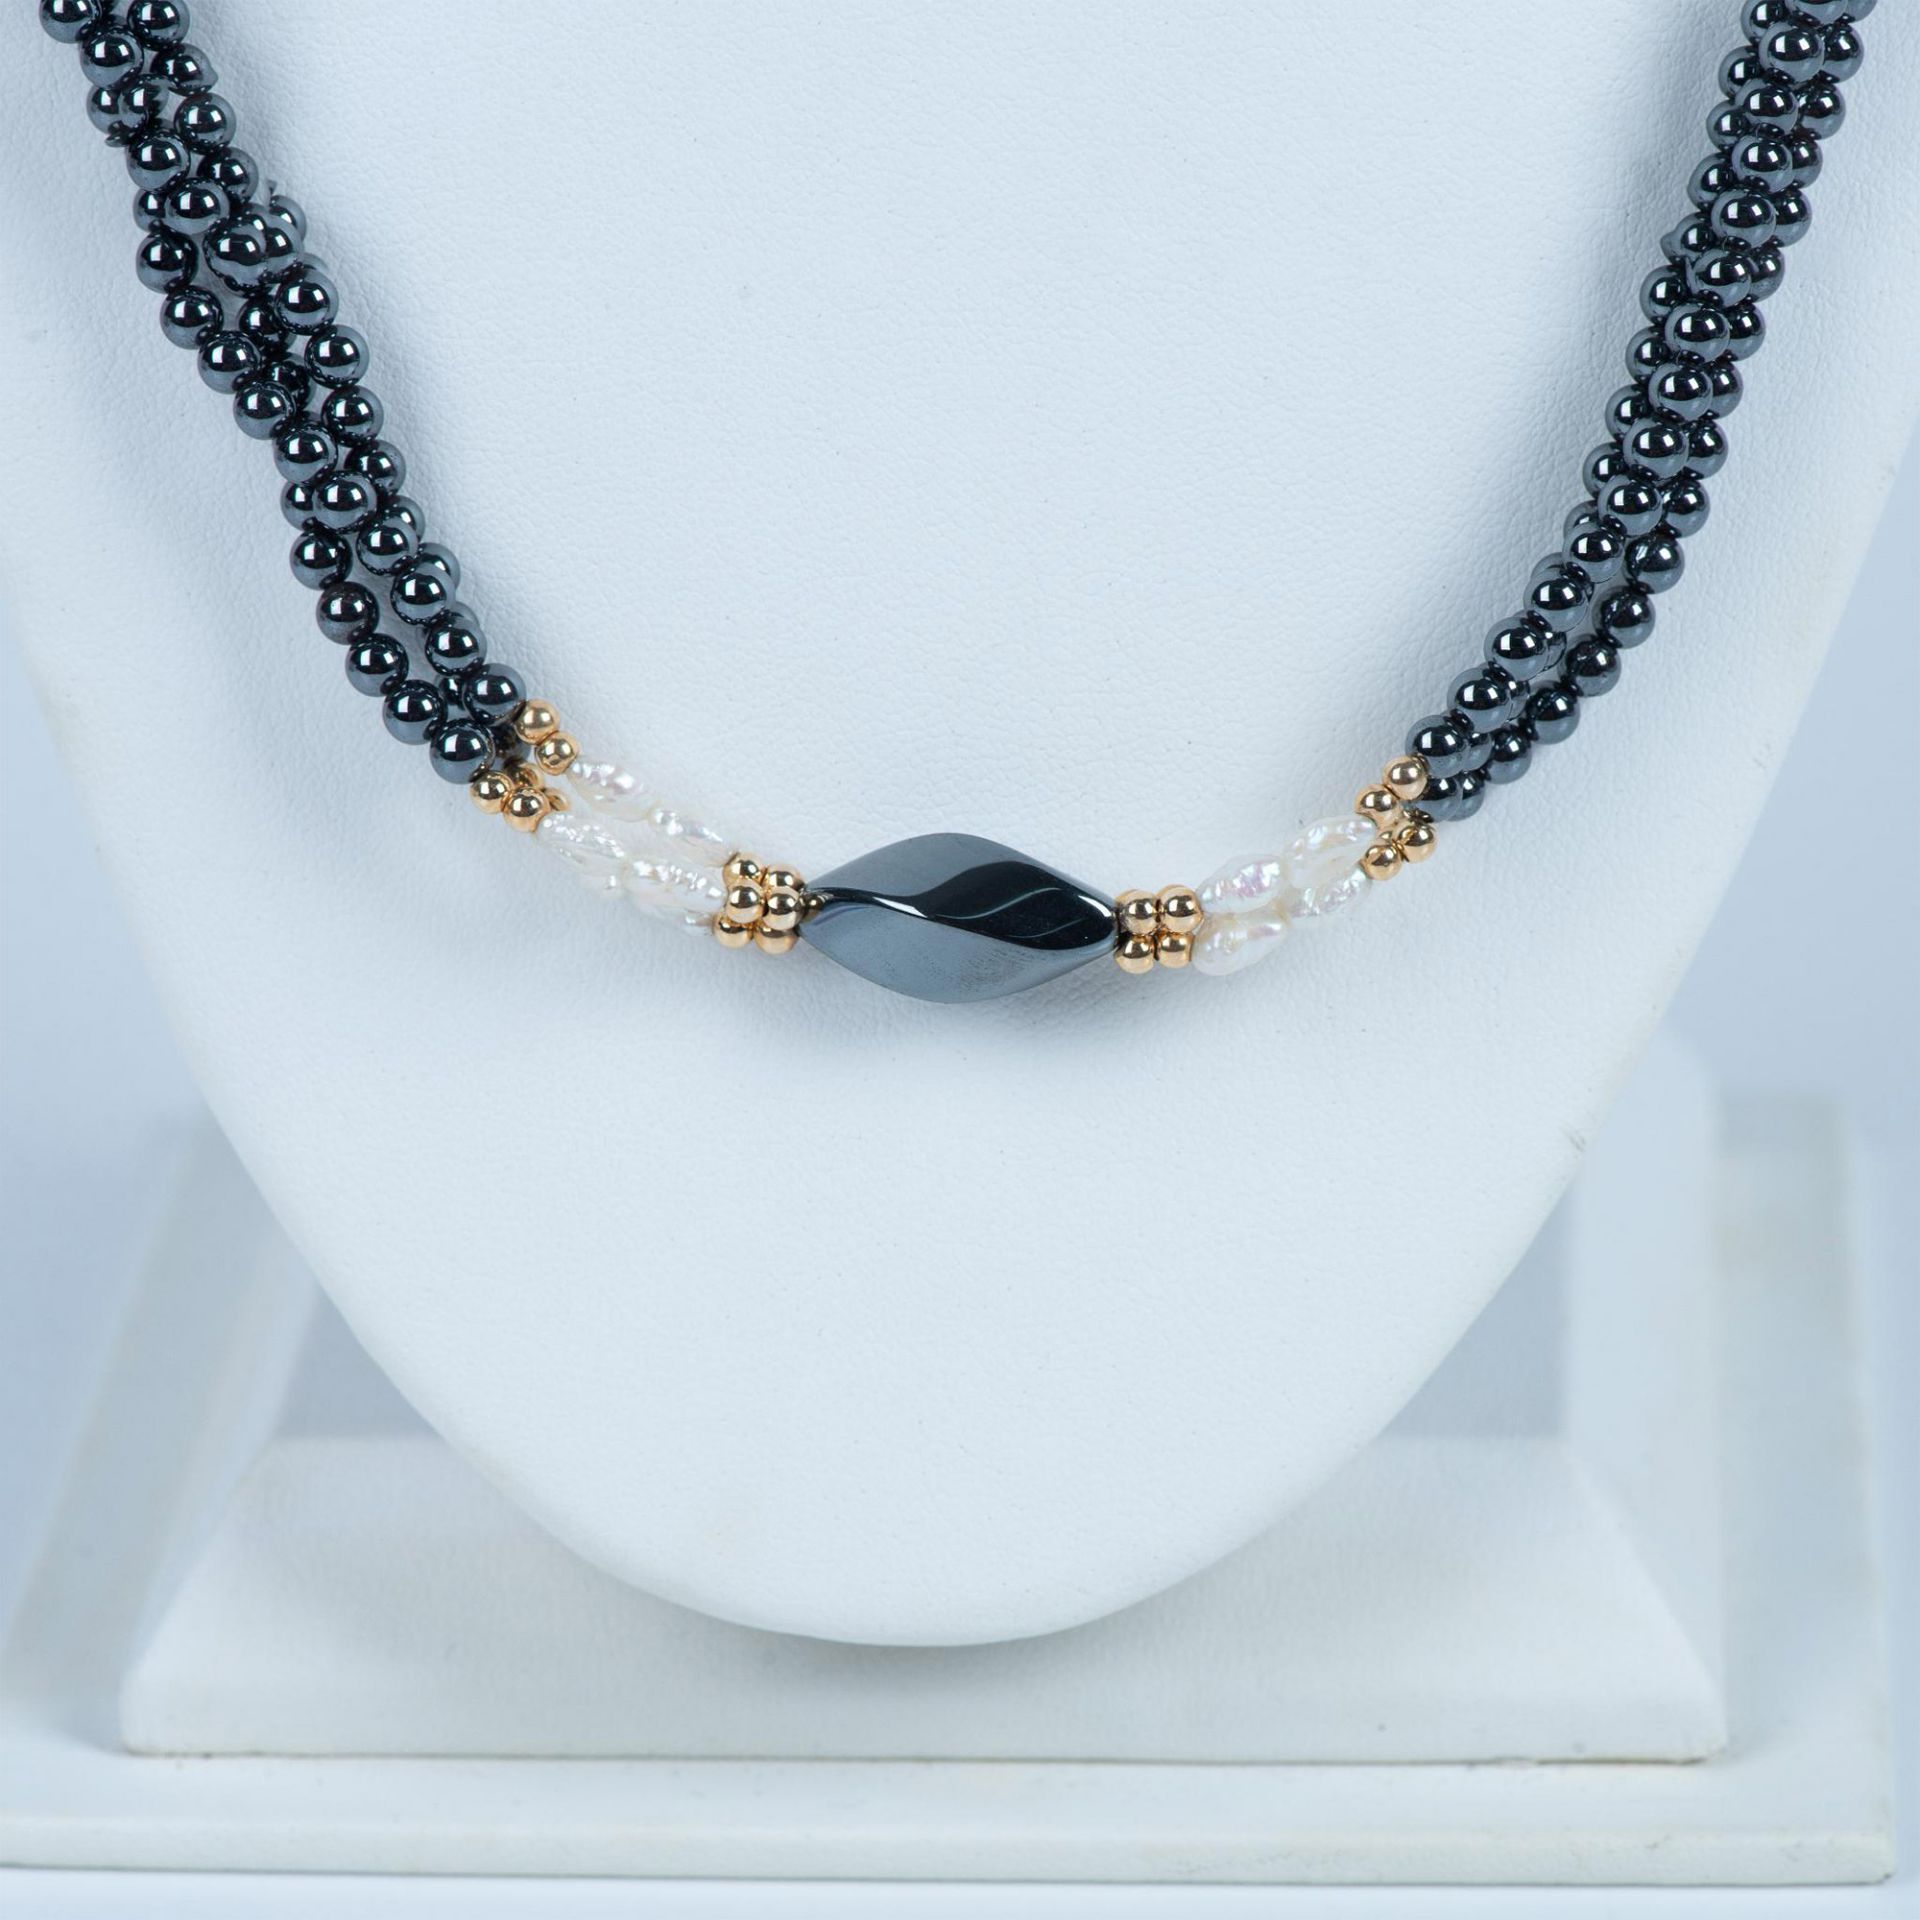 Black Onyx & Fresh Water Pearl Necklace - Image 5 of 7